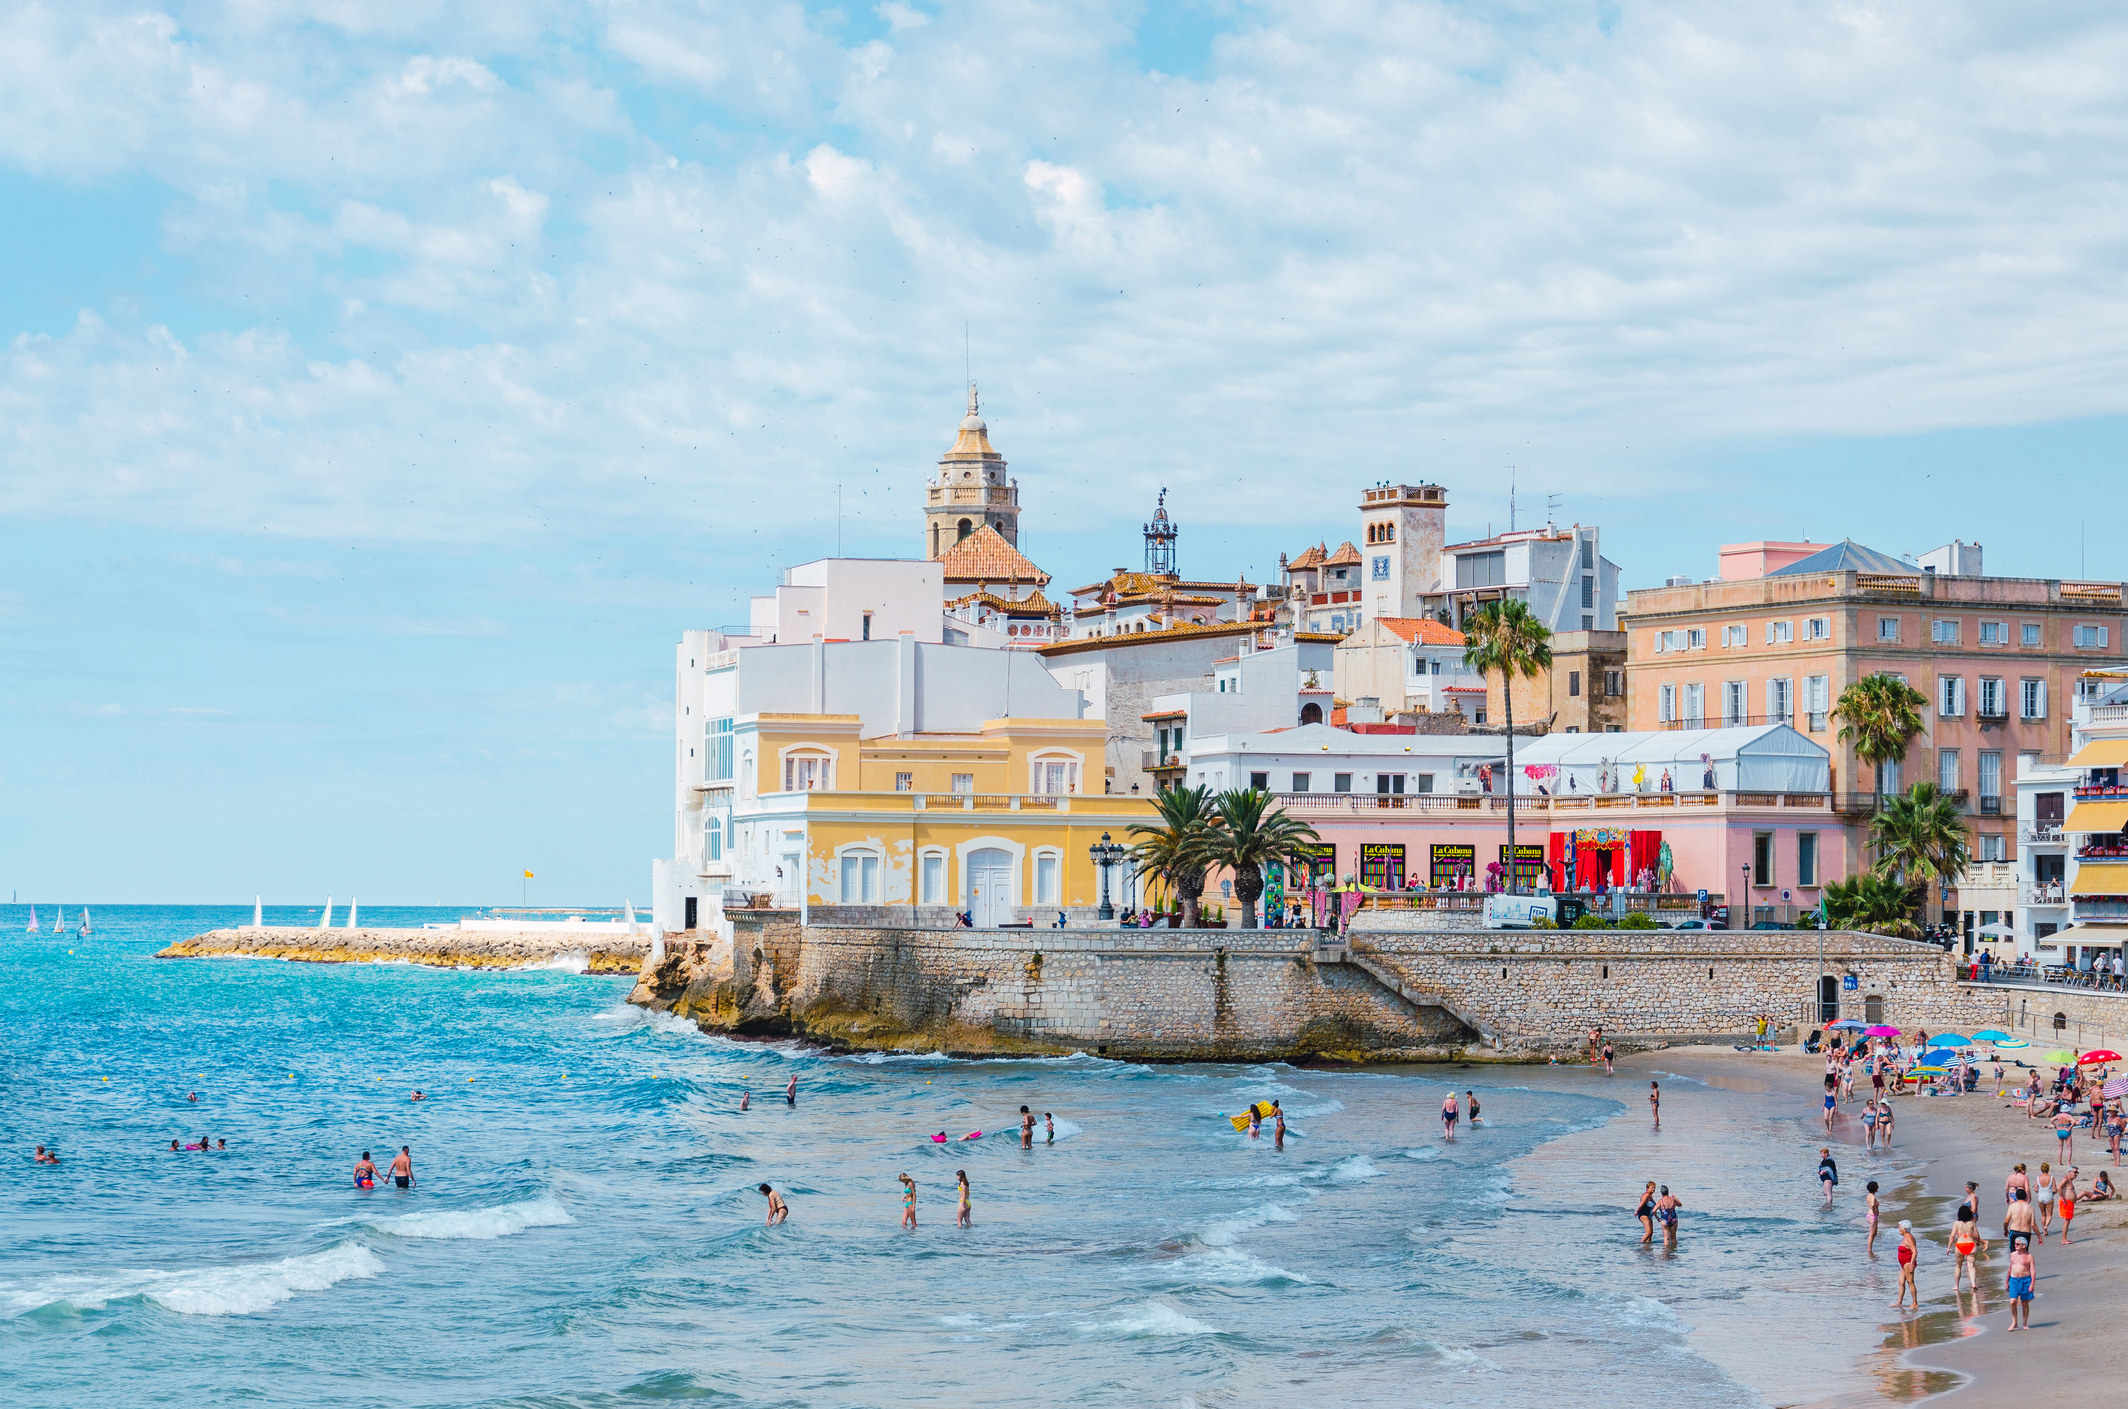 Colorful buildings overlooking the sea in Sitges, Spain.